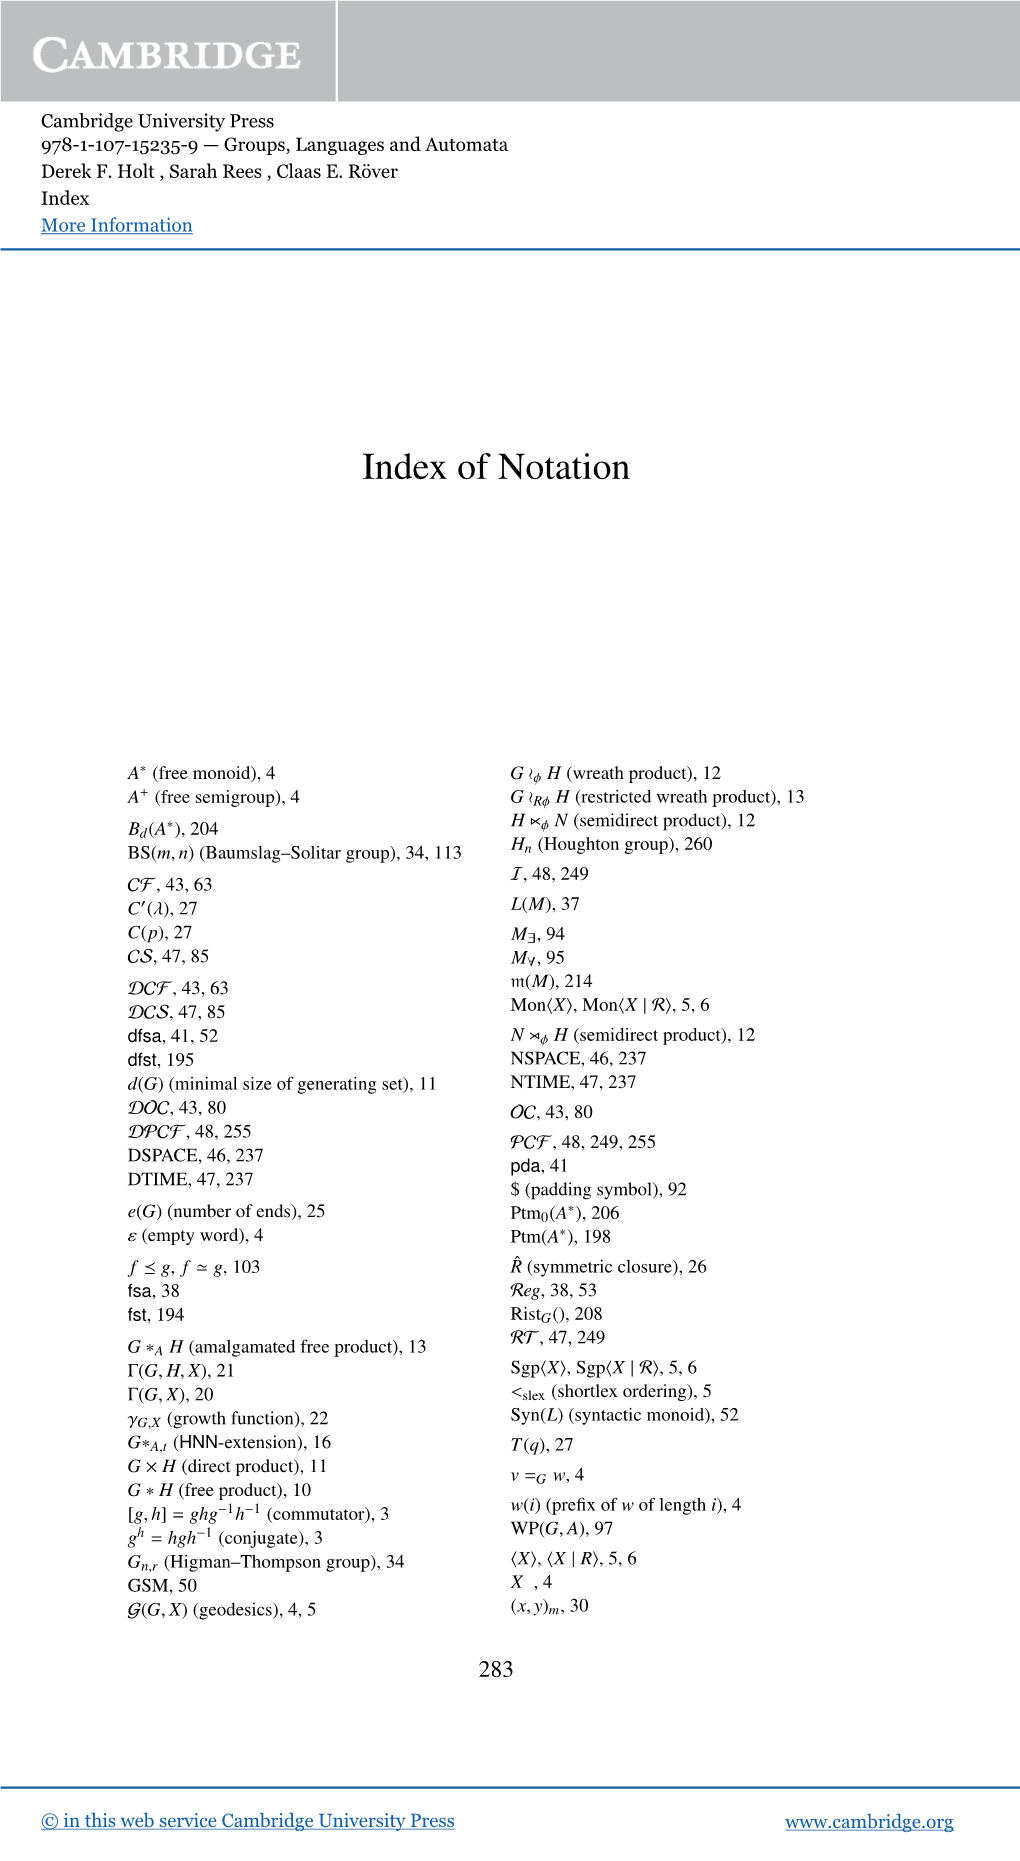 Index of Notation